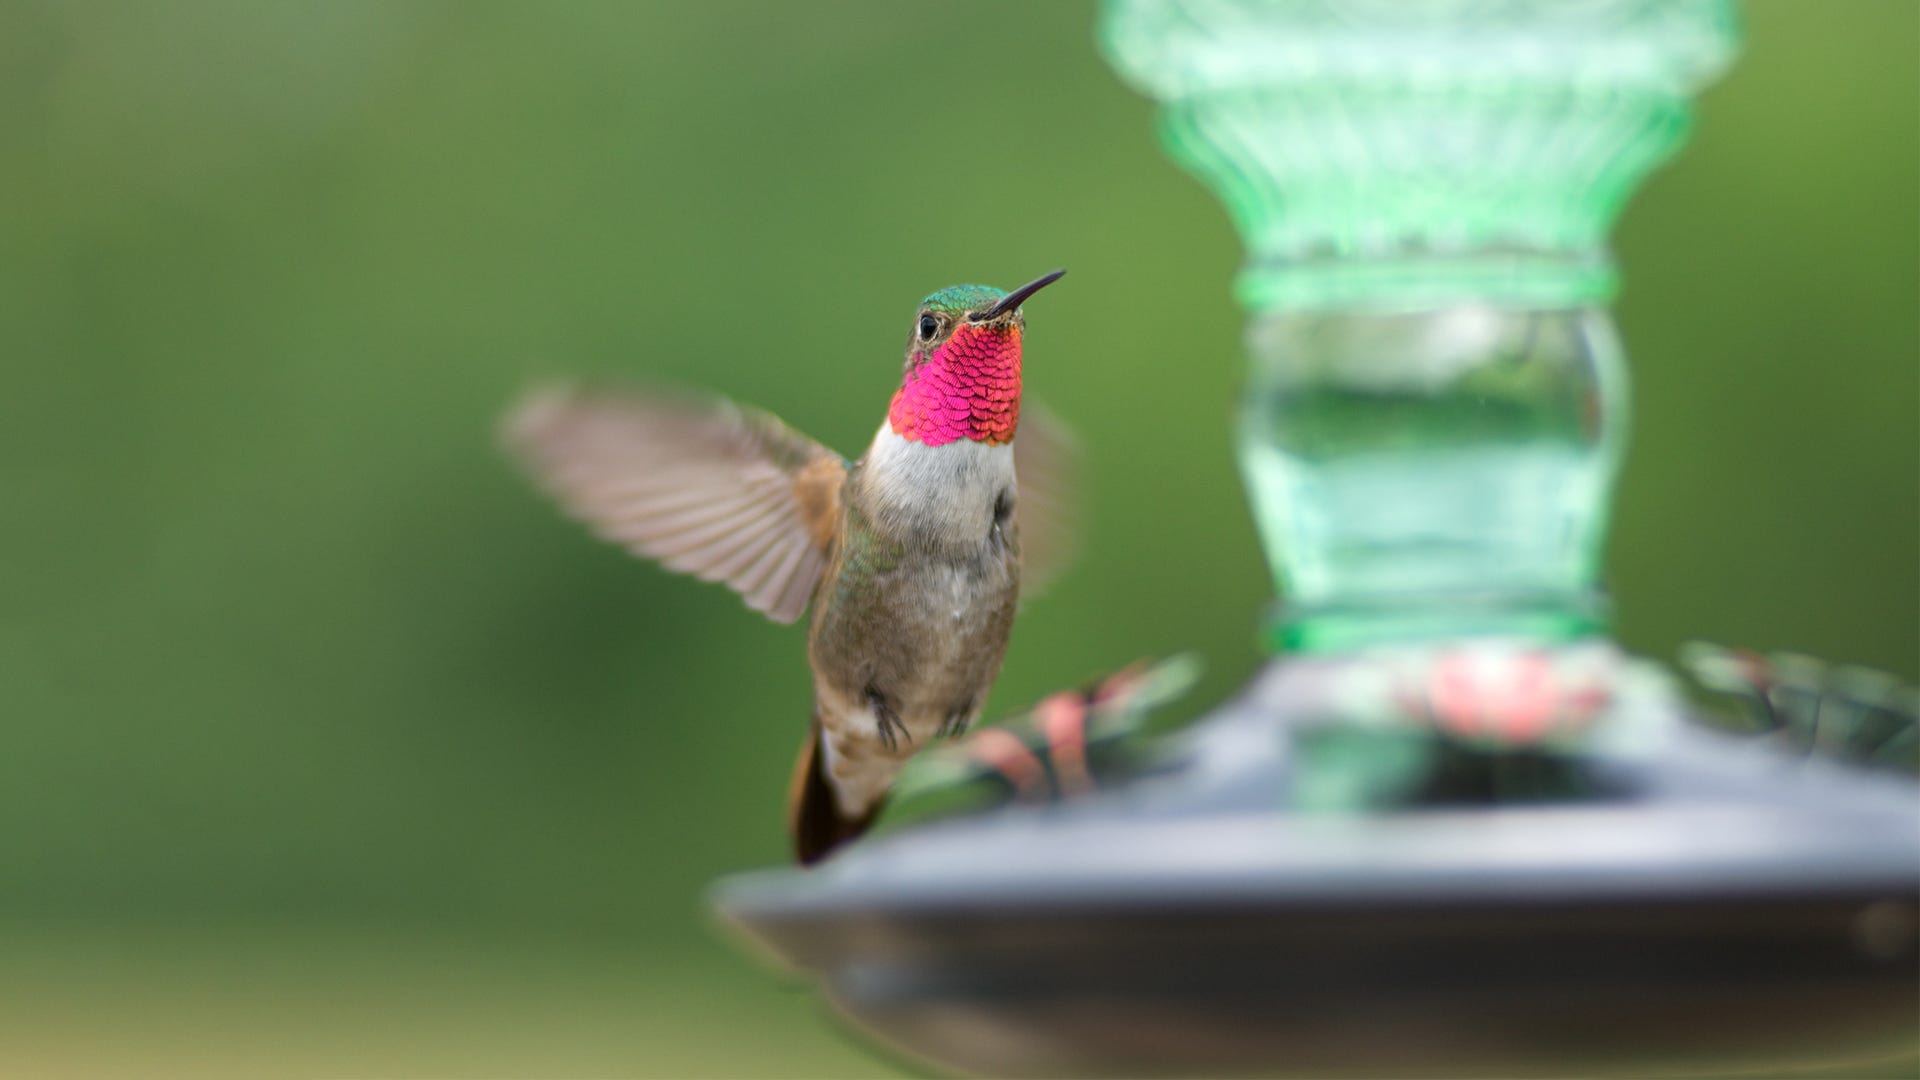 Flying Jewels, Gorgets & Other Little-Known Hummingbird Facts